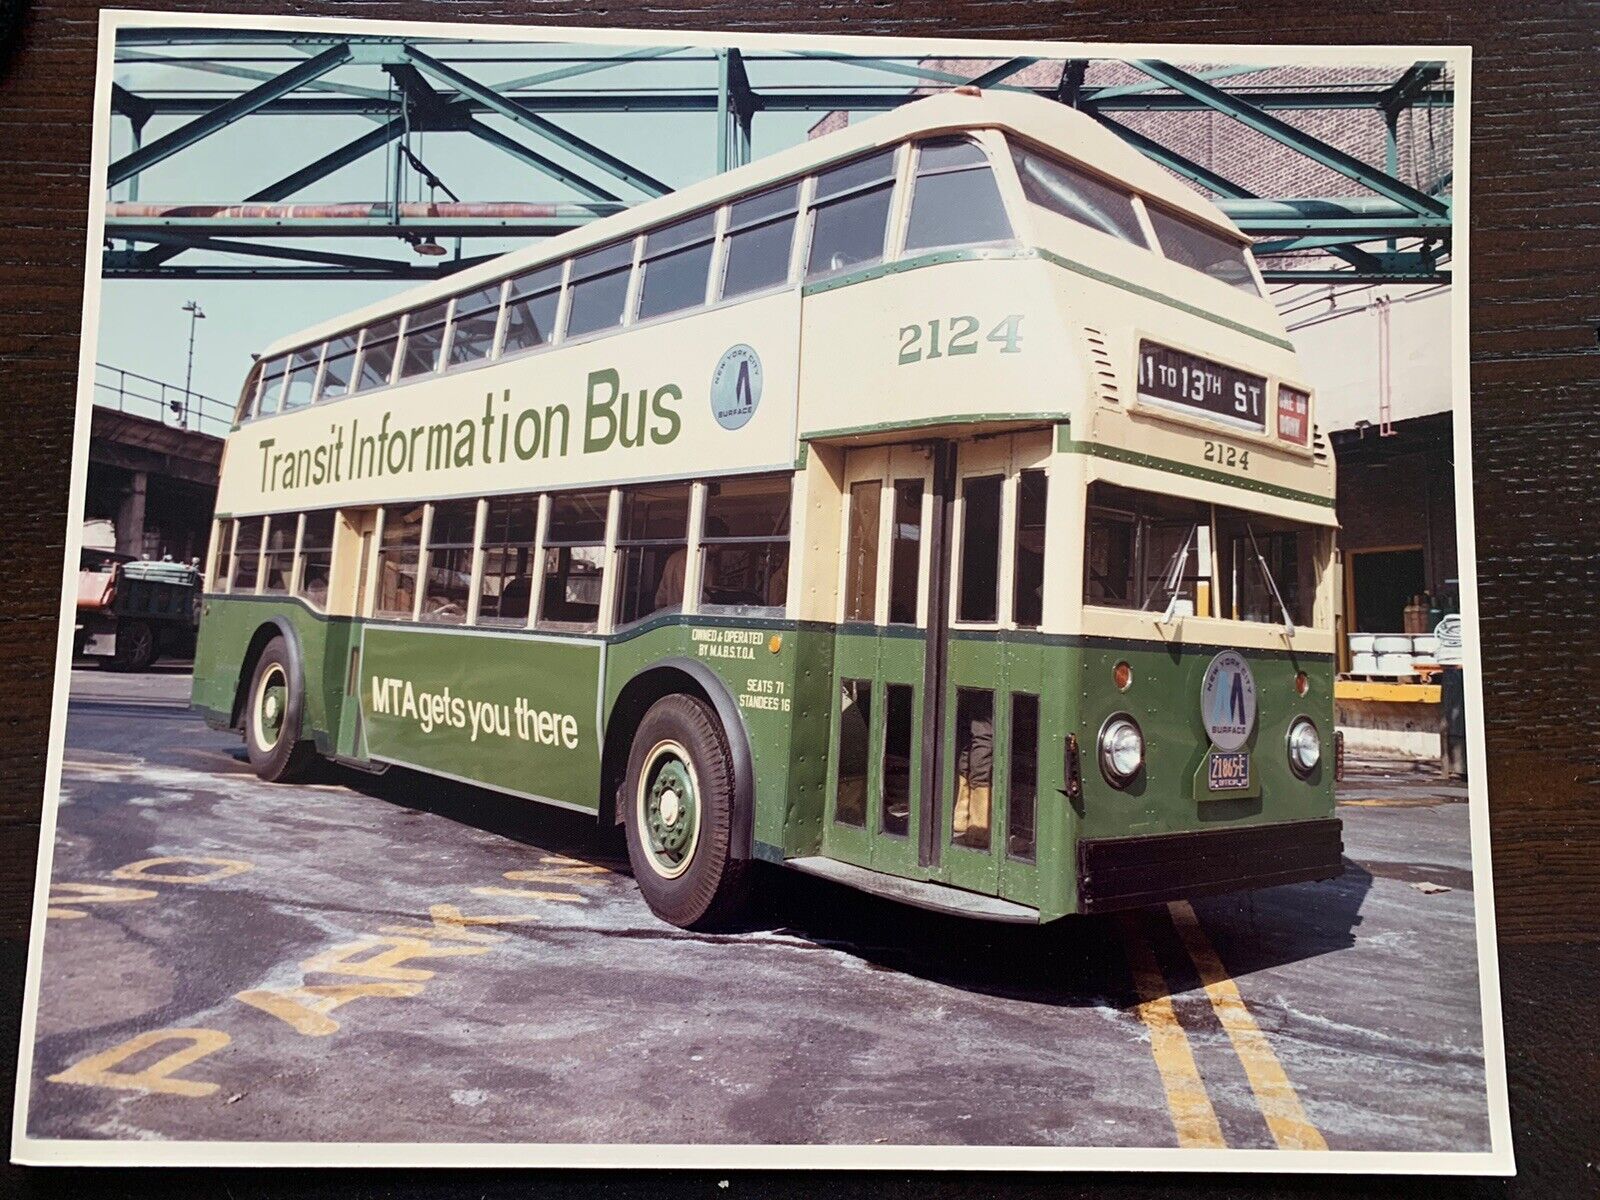 8X10 NY NYC DOUBLE DECKER BUS #2124 MTA OLD COLOR MABSTOA 13th STREET PHOTOGRAPH